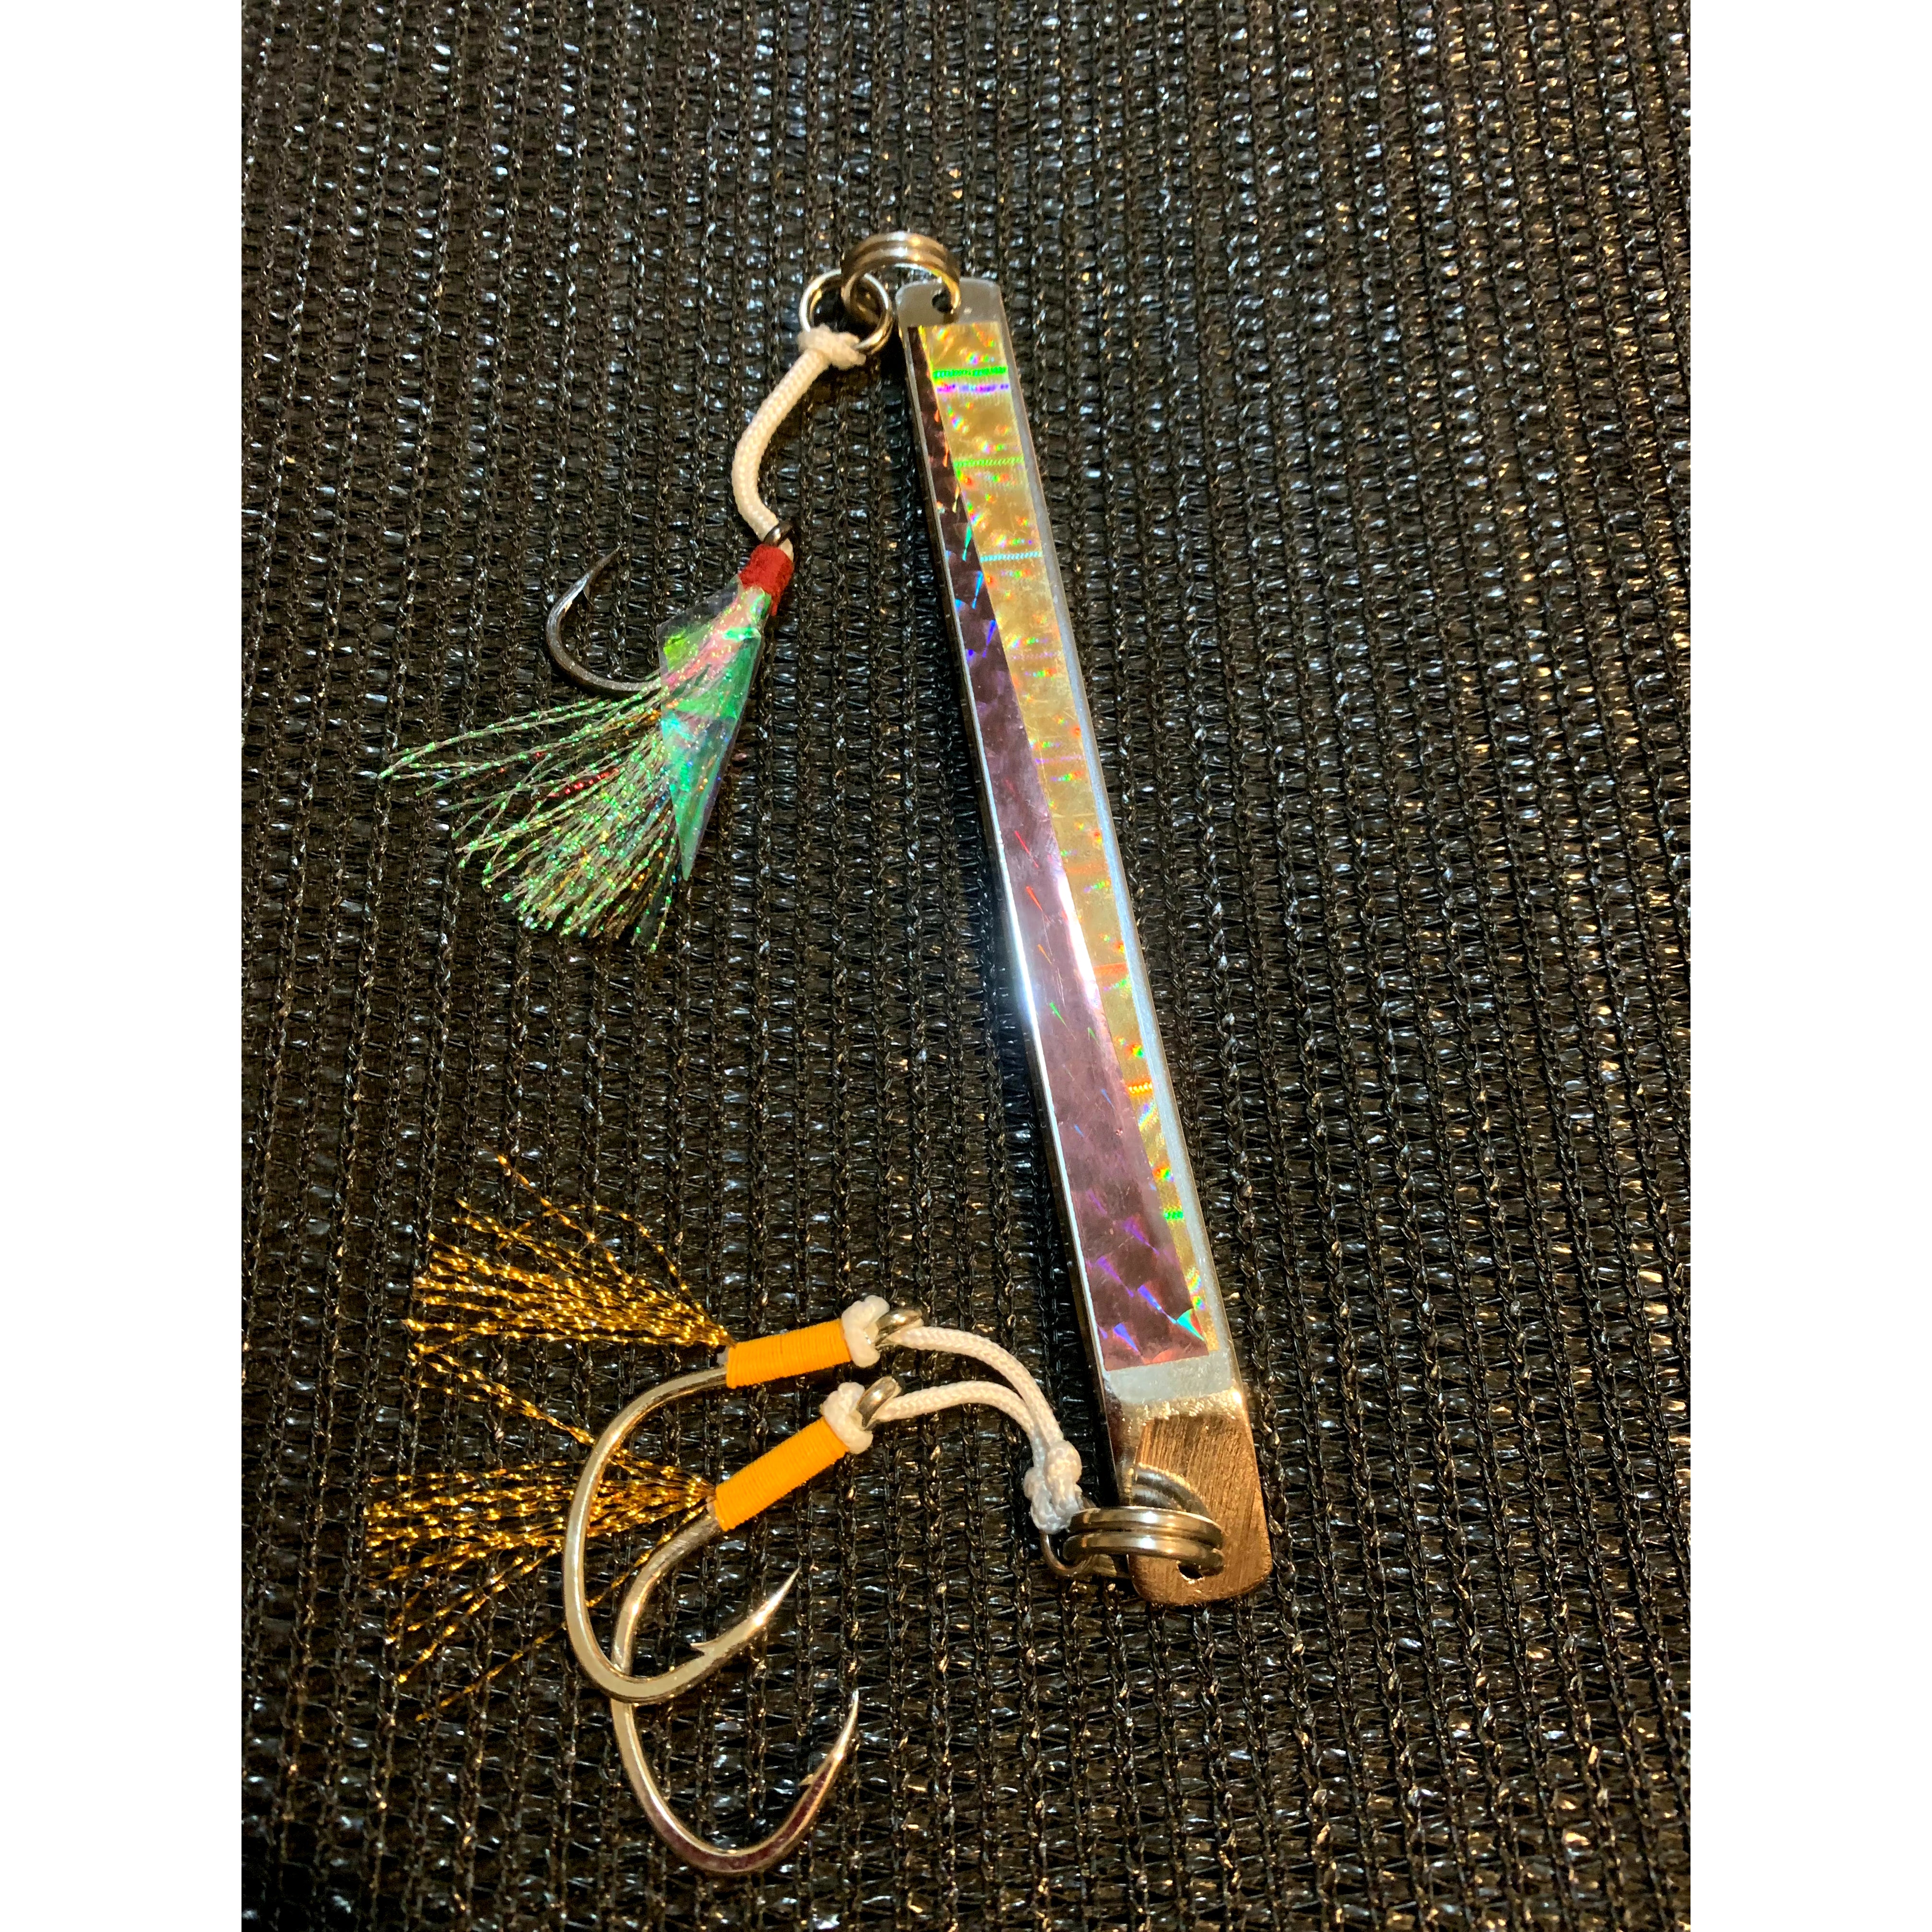 Fishing Metal Hand Made Jig Lures 150mm 105g